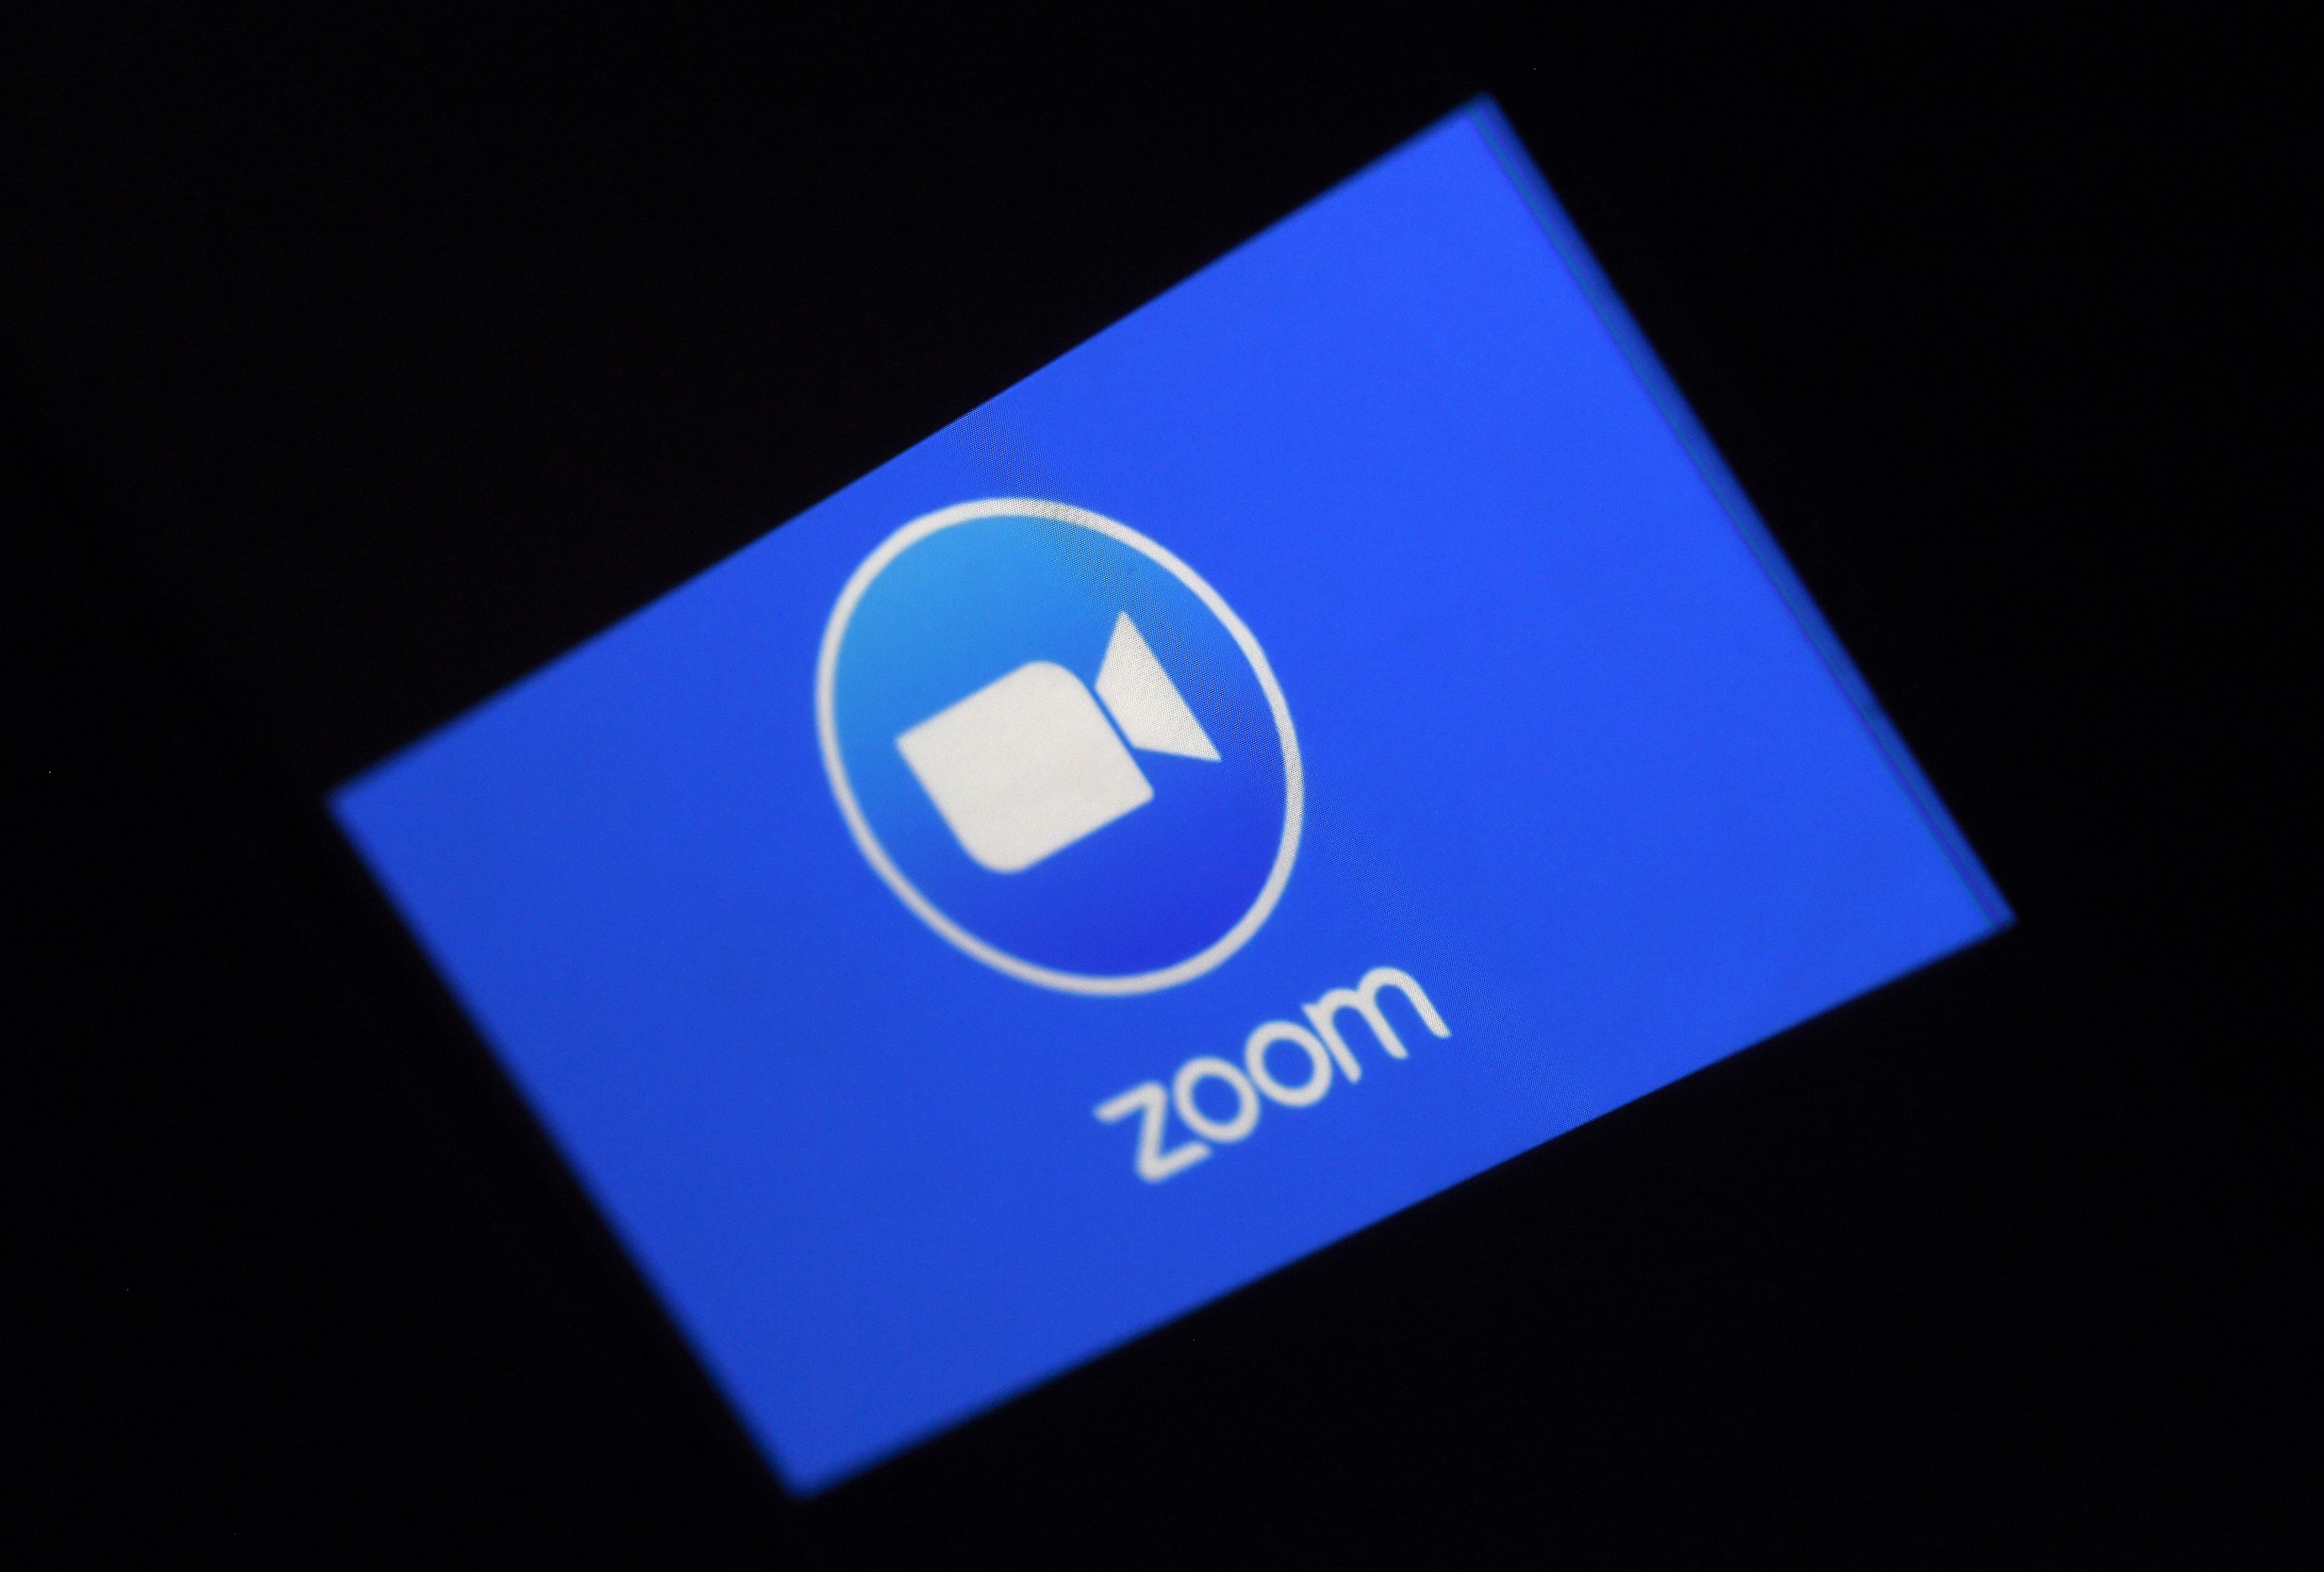 A Zoom App logo is displayed on a smartphone. (AFP Photo)